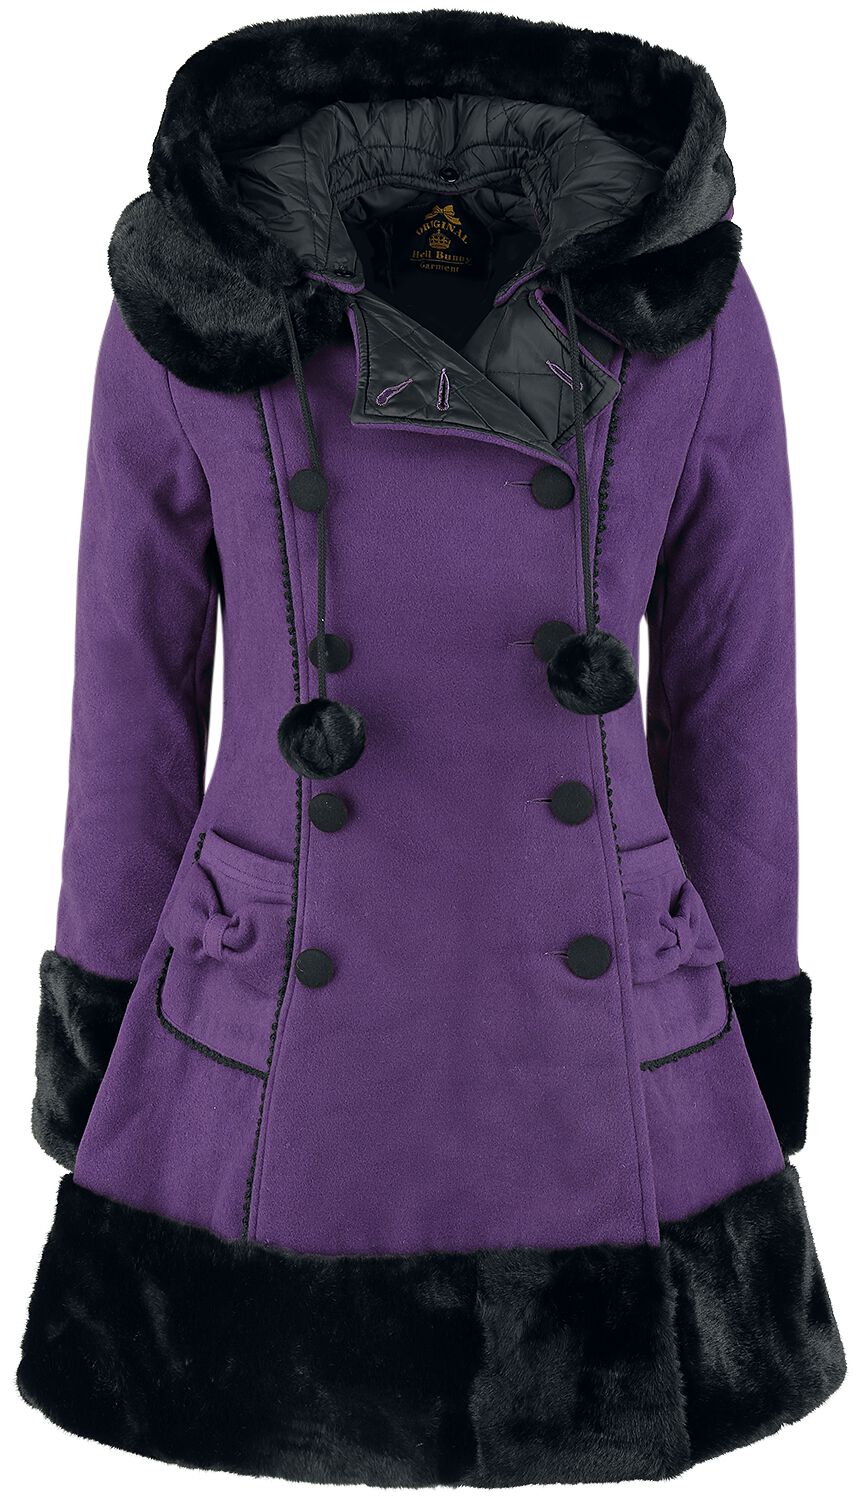 Image of Cappotto invernale Rockabilly di Hell Bunny - Sarah Jane Coat - XS a 4XL - Donna - lilla